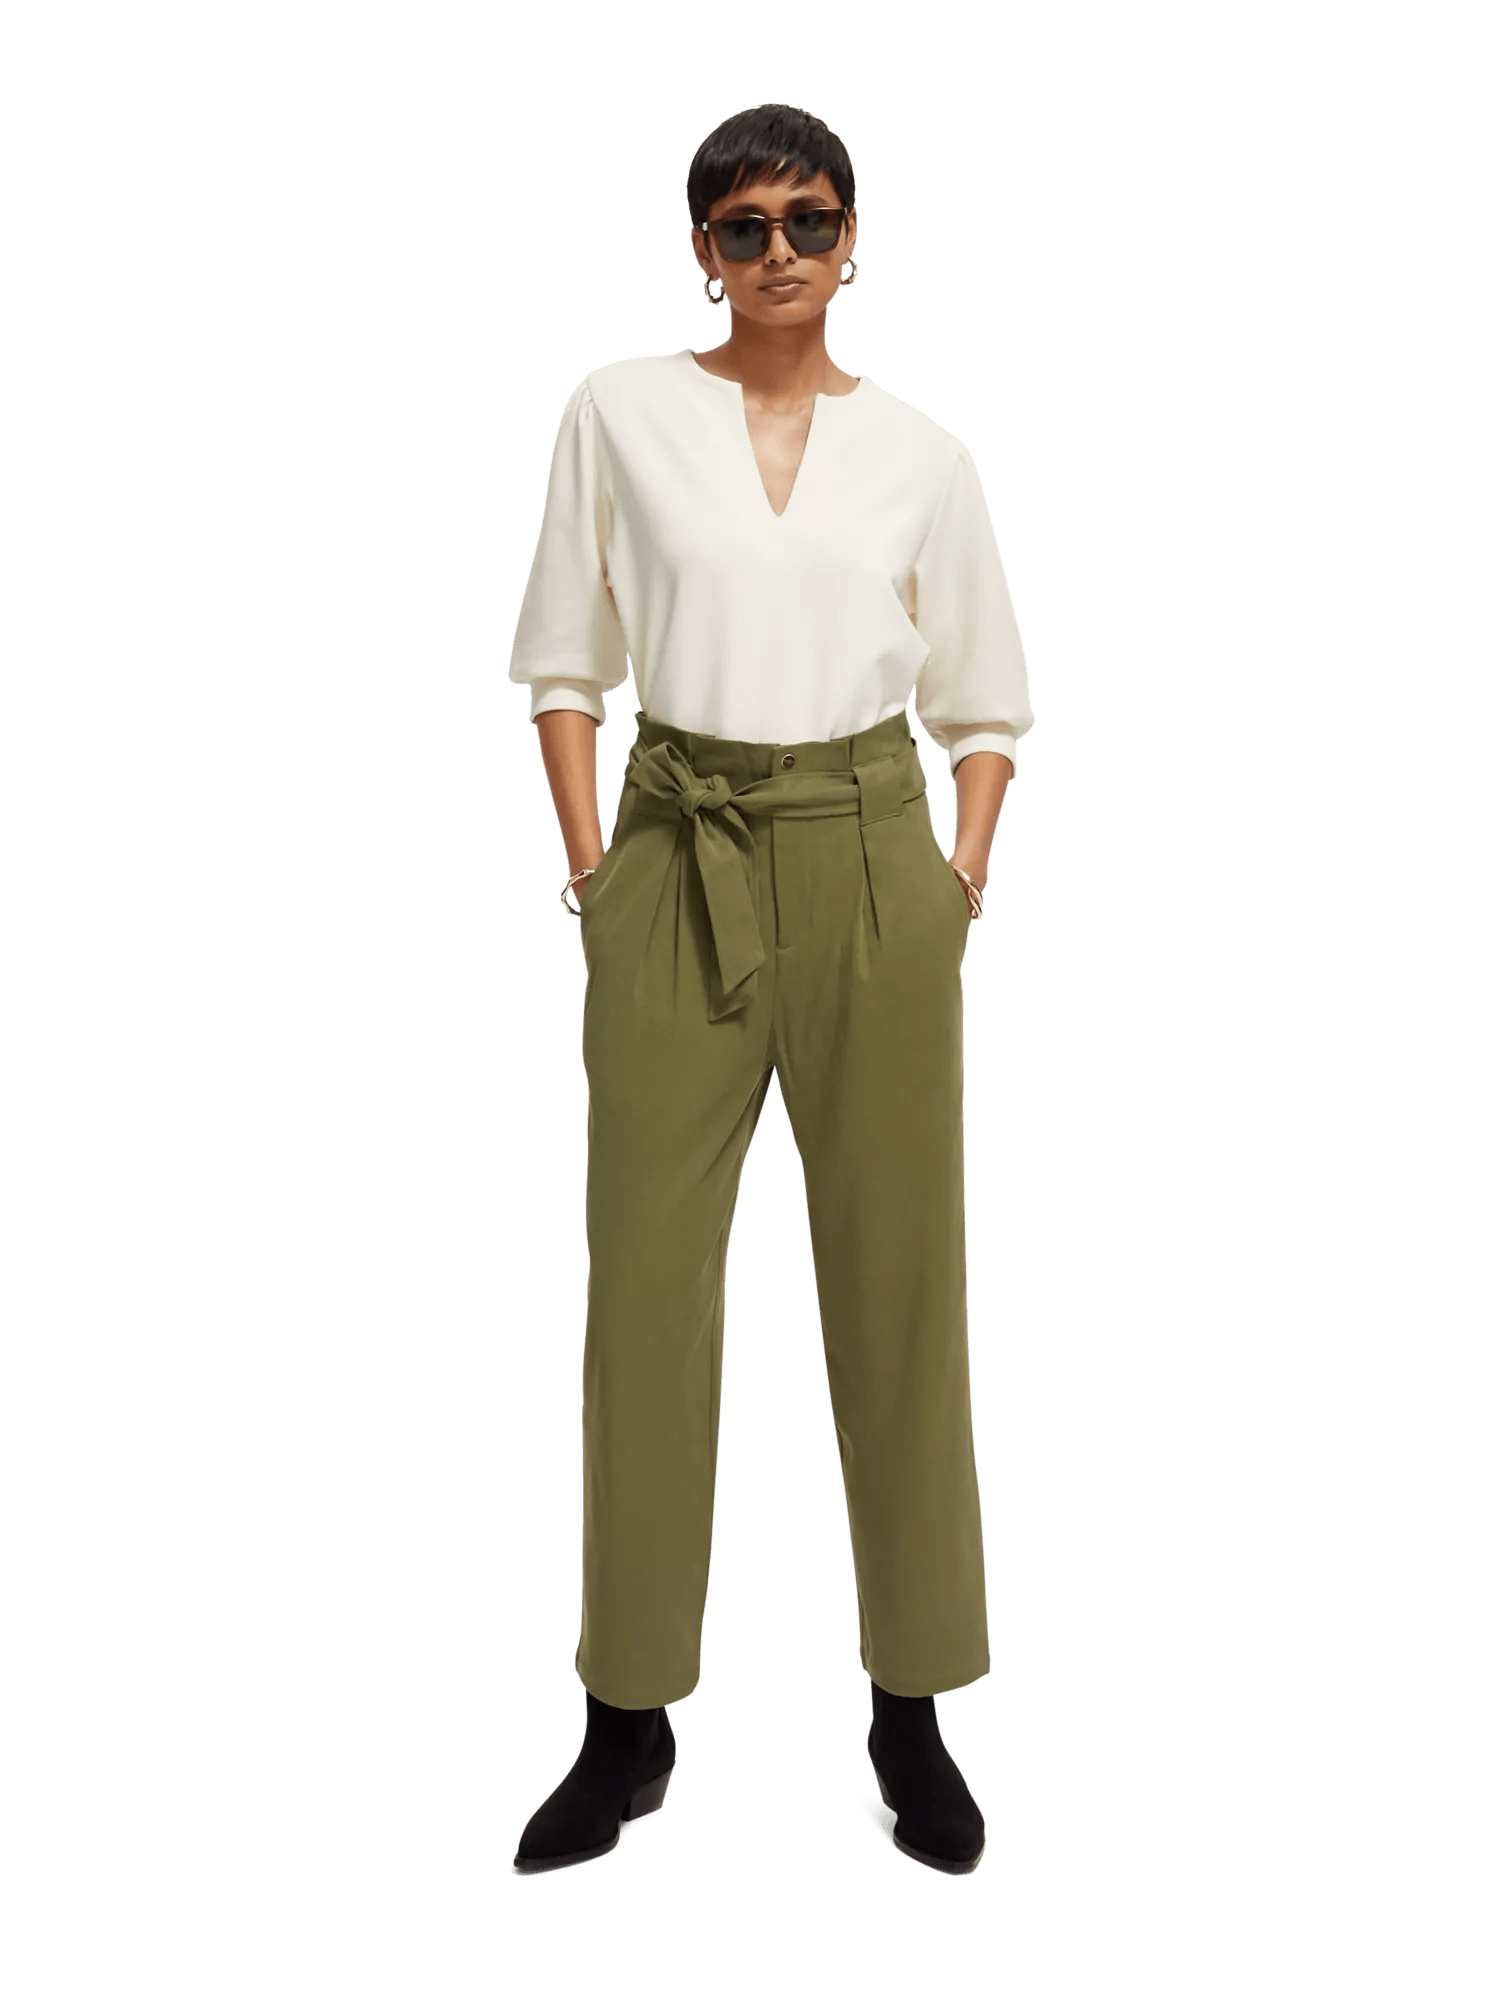 Scotch & Soda The Daisy high-rise paper bag trousers MDL-FNT